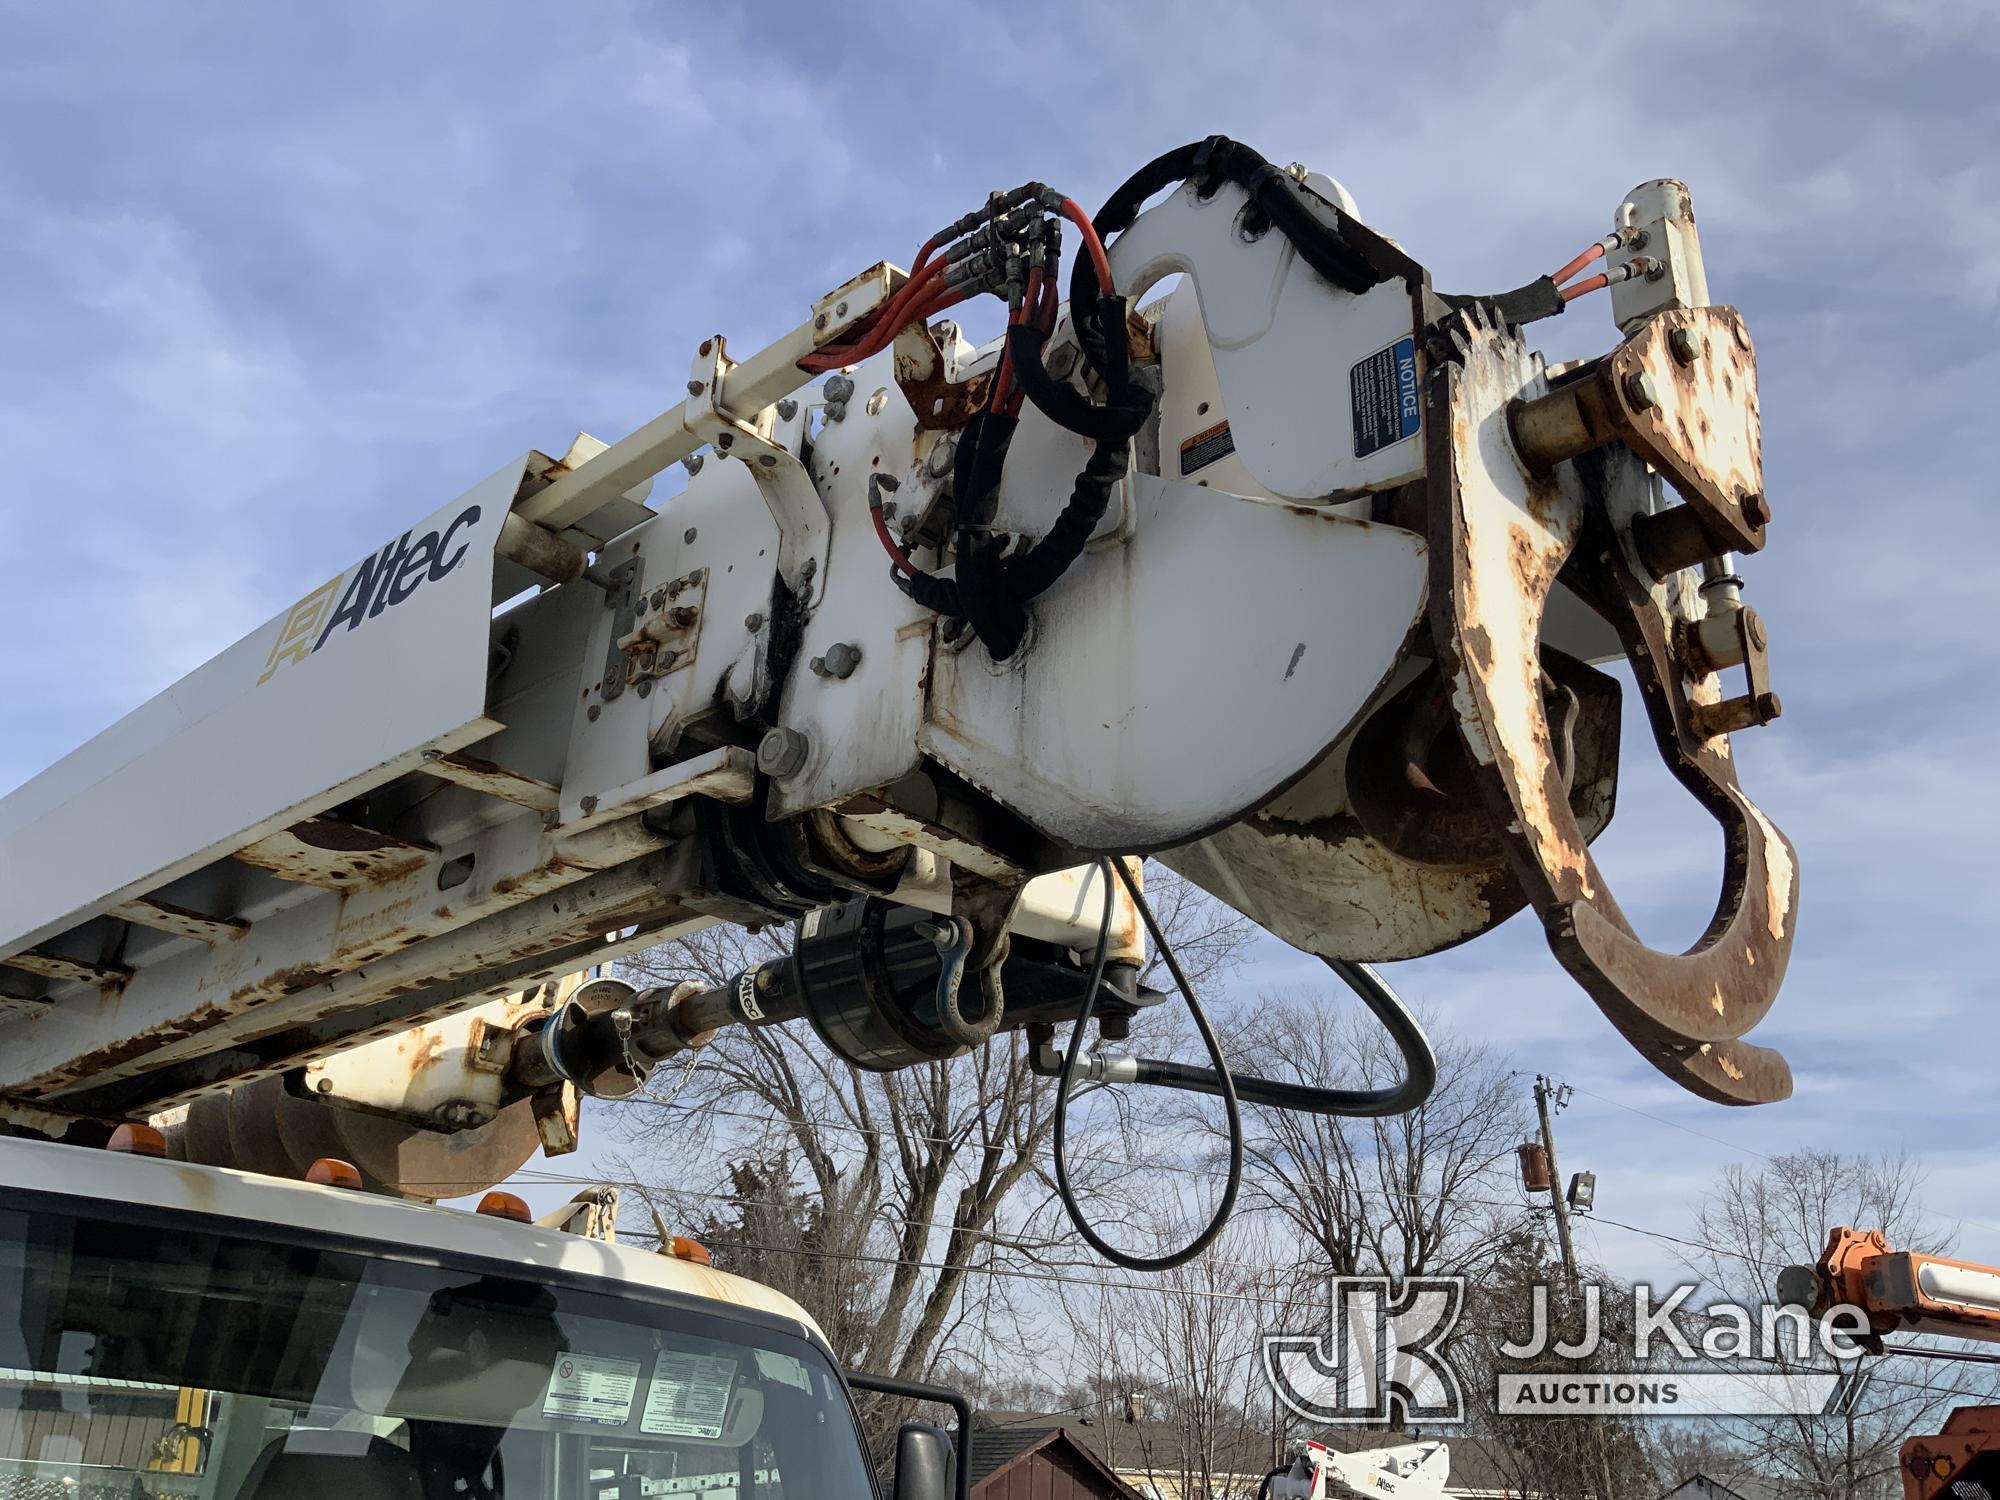 (South Beloit, IL) Altec DC47-TR, Digger Derrick mounted on 2016 Freightliner M2 106 Utility Truck R